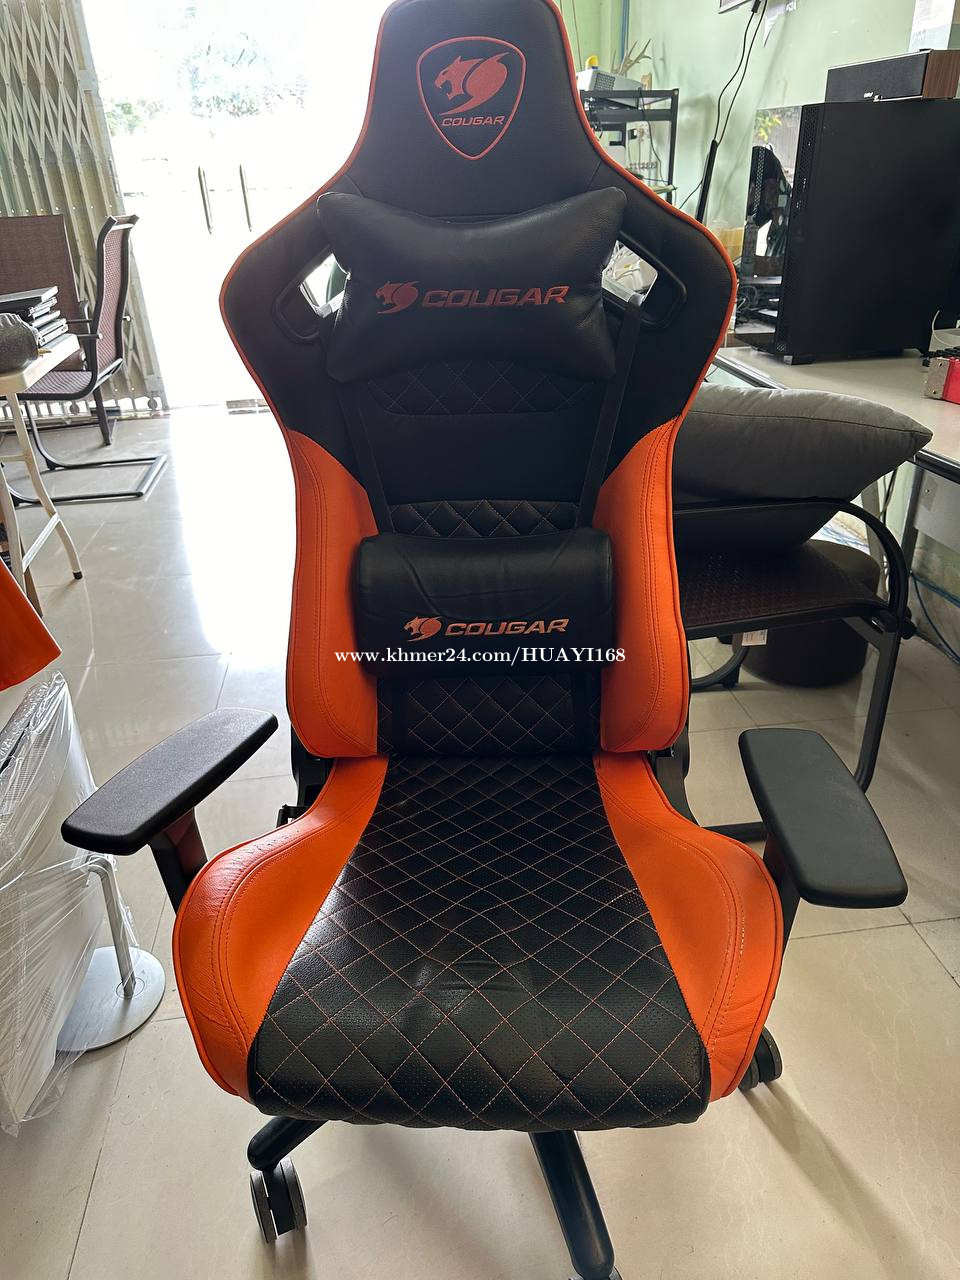 Cougar Armor Gaming Chair 95%new price $120 in Phnom Penh Thmei, Saensokh,  Phnom Penh, Cambodia - HUA YI phone and computers